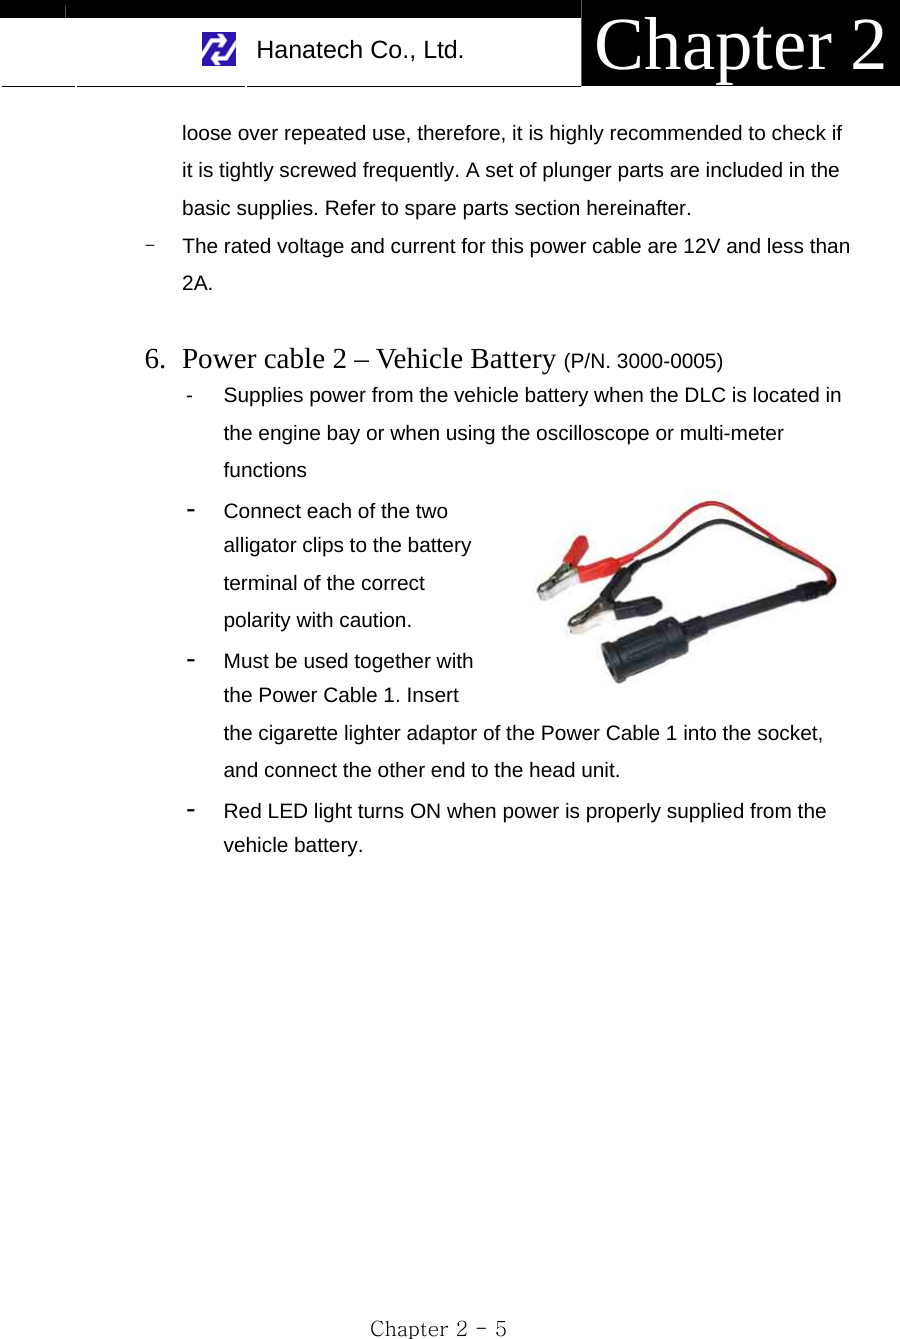     Hanatech Co., Ltd.  Chapter 2 Chapter 2 - 5 loose over repeated use, therefore, it is highly recommended to check if it is tightly screwed frequently. A set of plunger parts are included in the basic supplies. Refer to spare parts section hereinafter. -  The rated voltage and current for this power cable are 12V and less than 2A.  6. Power cable 2 – Vehicle Battery (P/N. 3000-0005) -  Supplies power from the vehicle battery when the DLC is located in the engine bay or when using the oscilloscope or multi-meter functions -  Connect each of the two alligator clips to the battery terminal of the correct polarity with caution.     -  Must be used together with the Power Cable 1. Insert the cigarette lighter adaptor of the Power Cable 1 into the socket, and connect the other end to the head unit.     -  Red LED light turns ON when power is properly supplied from the vehicle battery. 